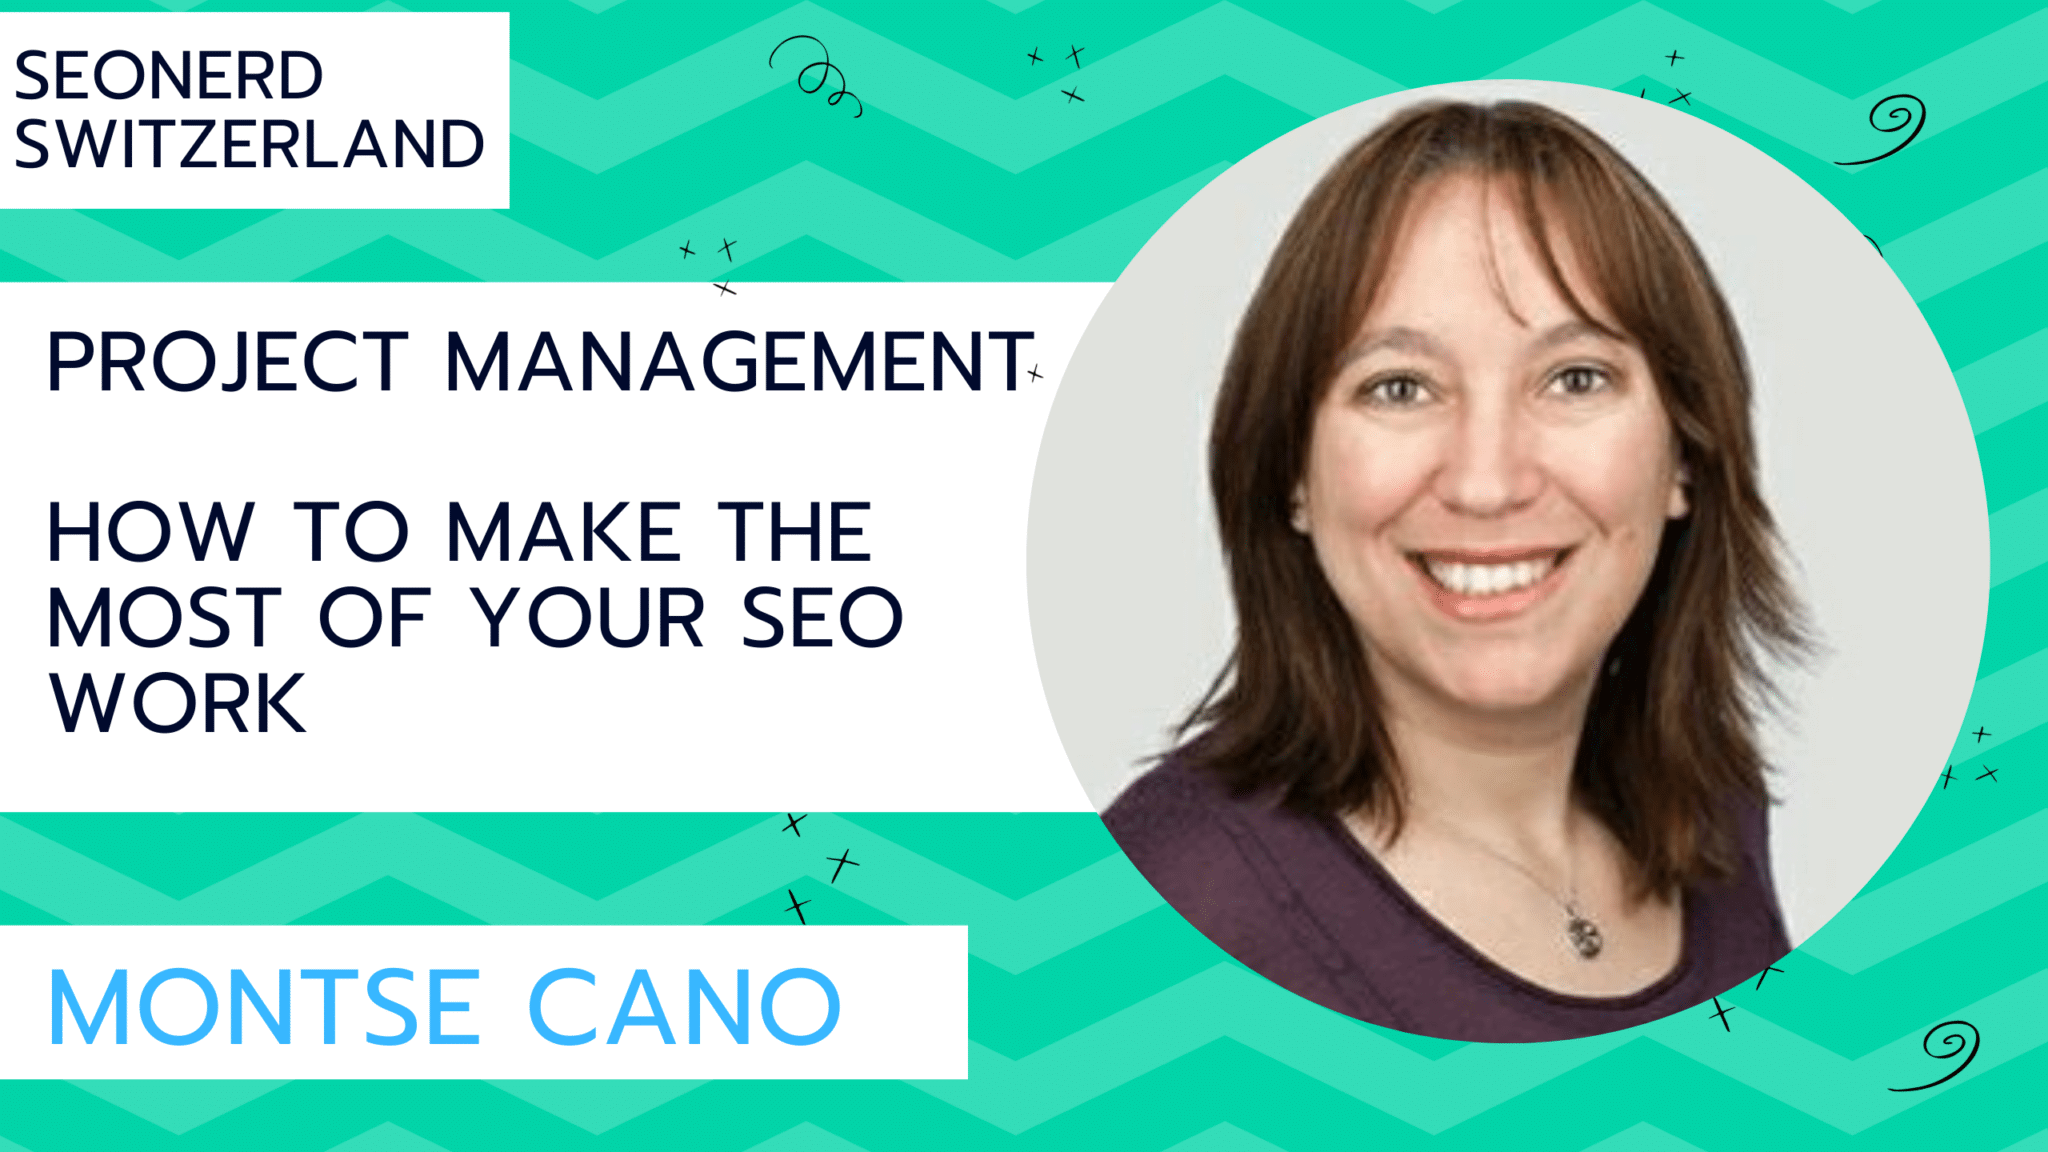 How To Make The Most Of Your SEO Work w/ Montse Cano